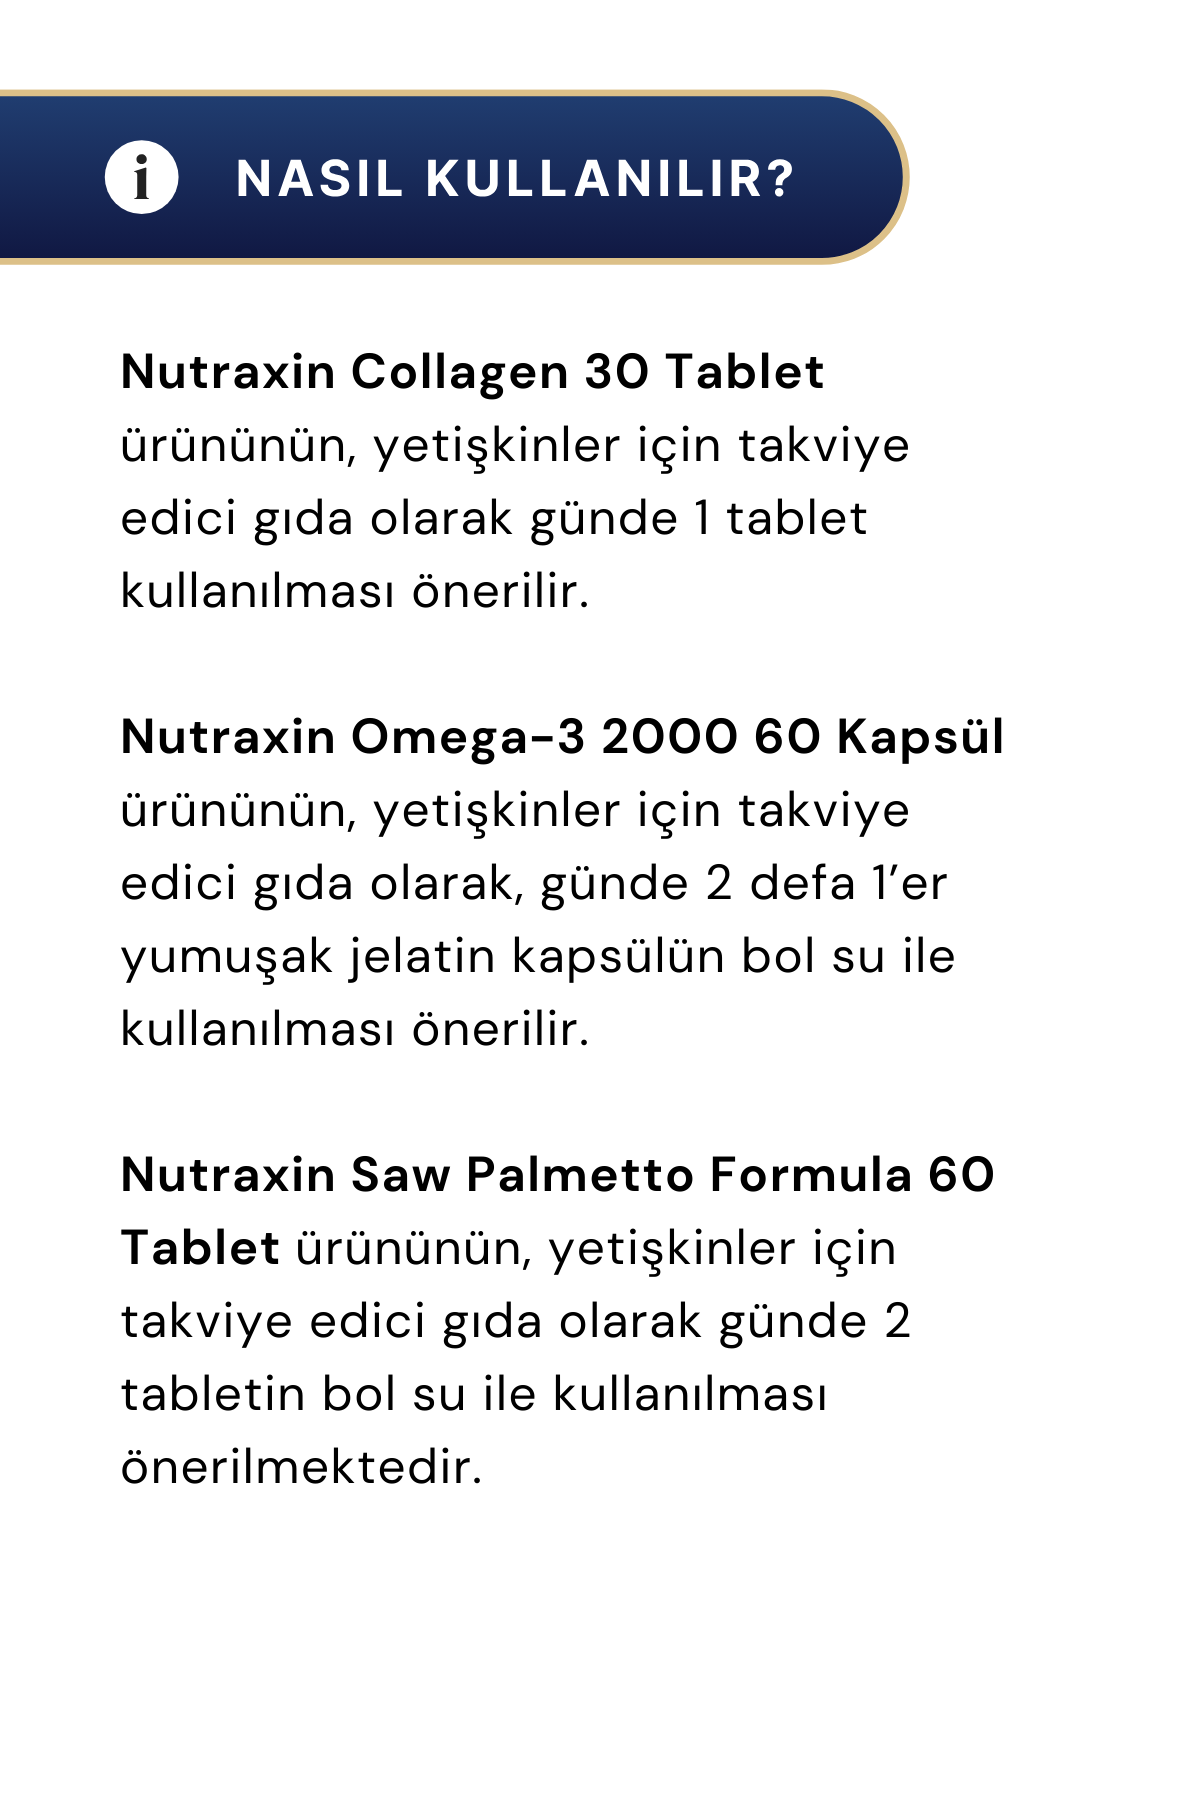 Nutraxin Collagen 30 Tablet & Omega-3 2000 mg & Saw Palmetto